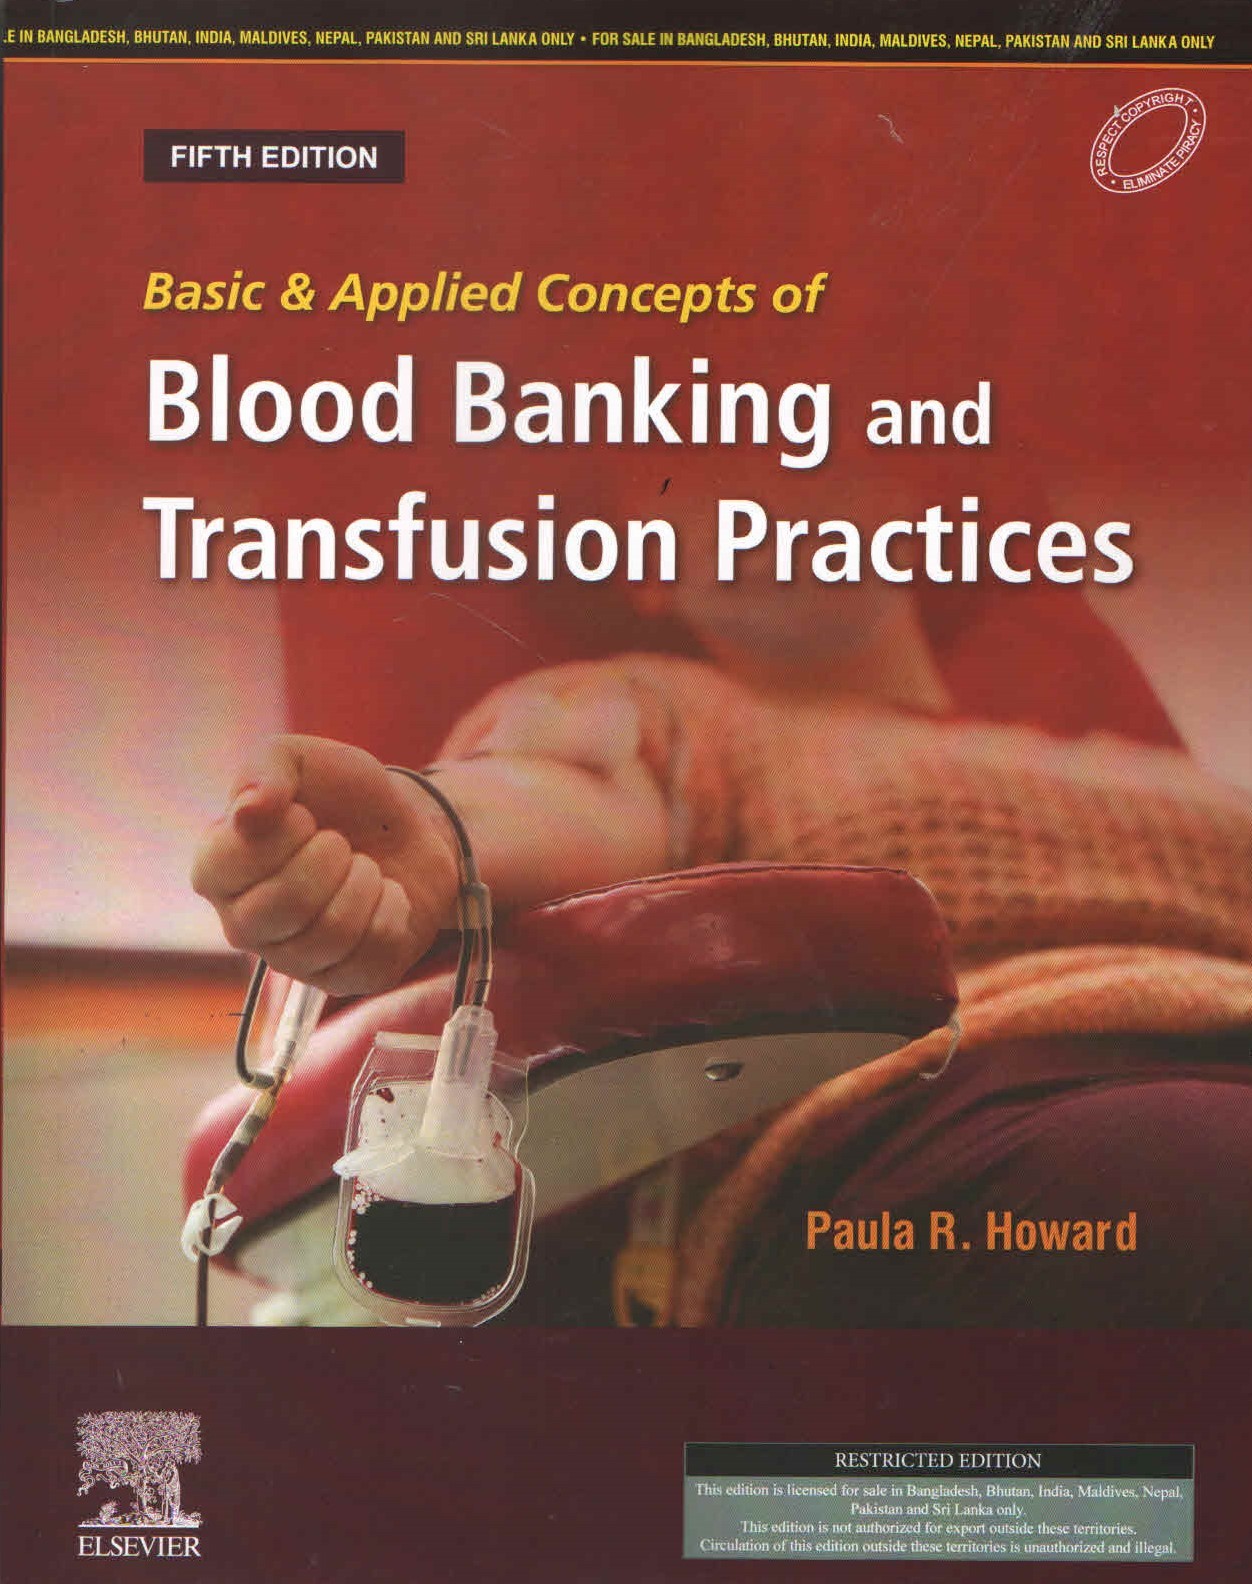 

exclusive-publishers/elsevier/basic-and-applied-concepts-of-blood-banking-and-transfusion-practices-9788131269527